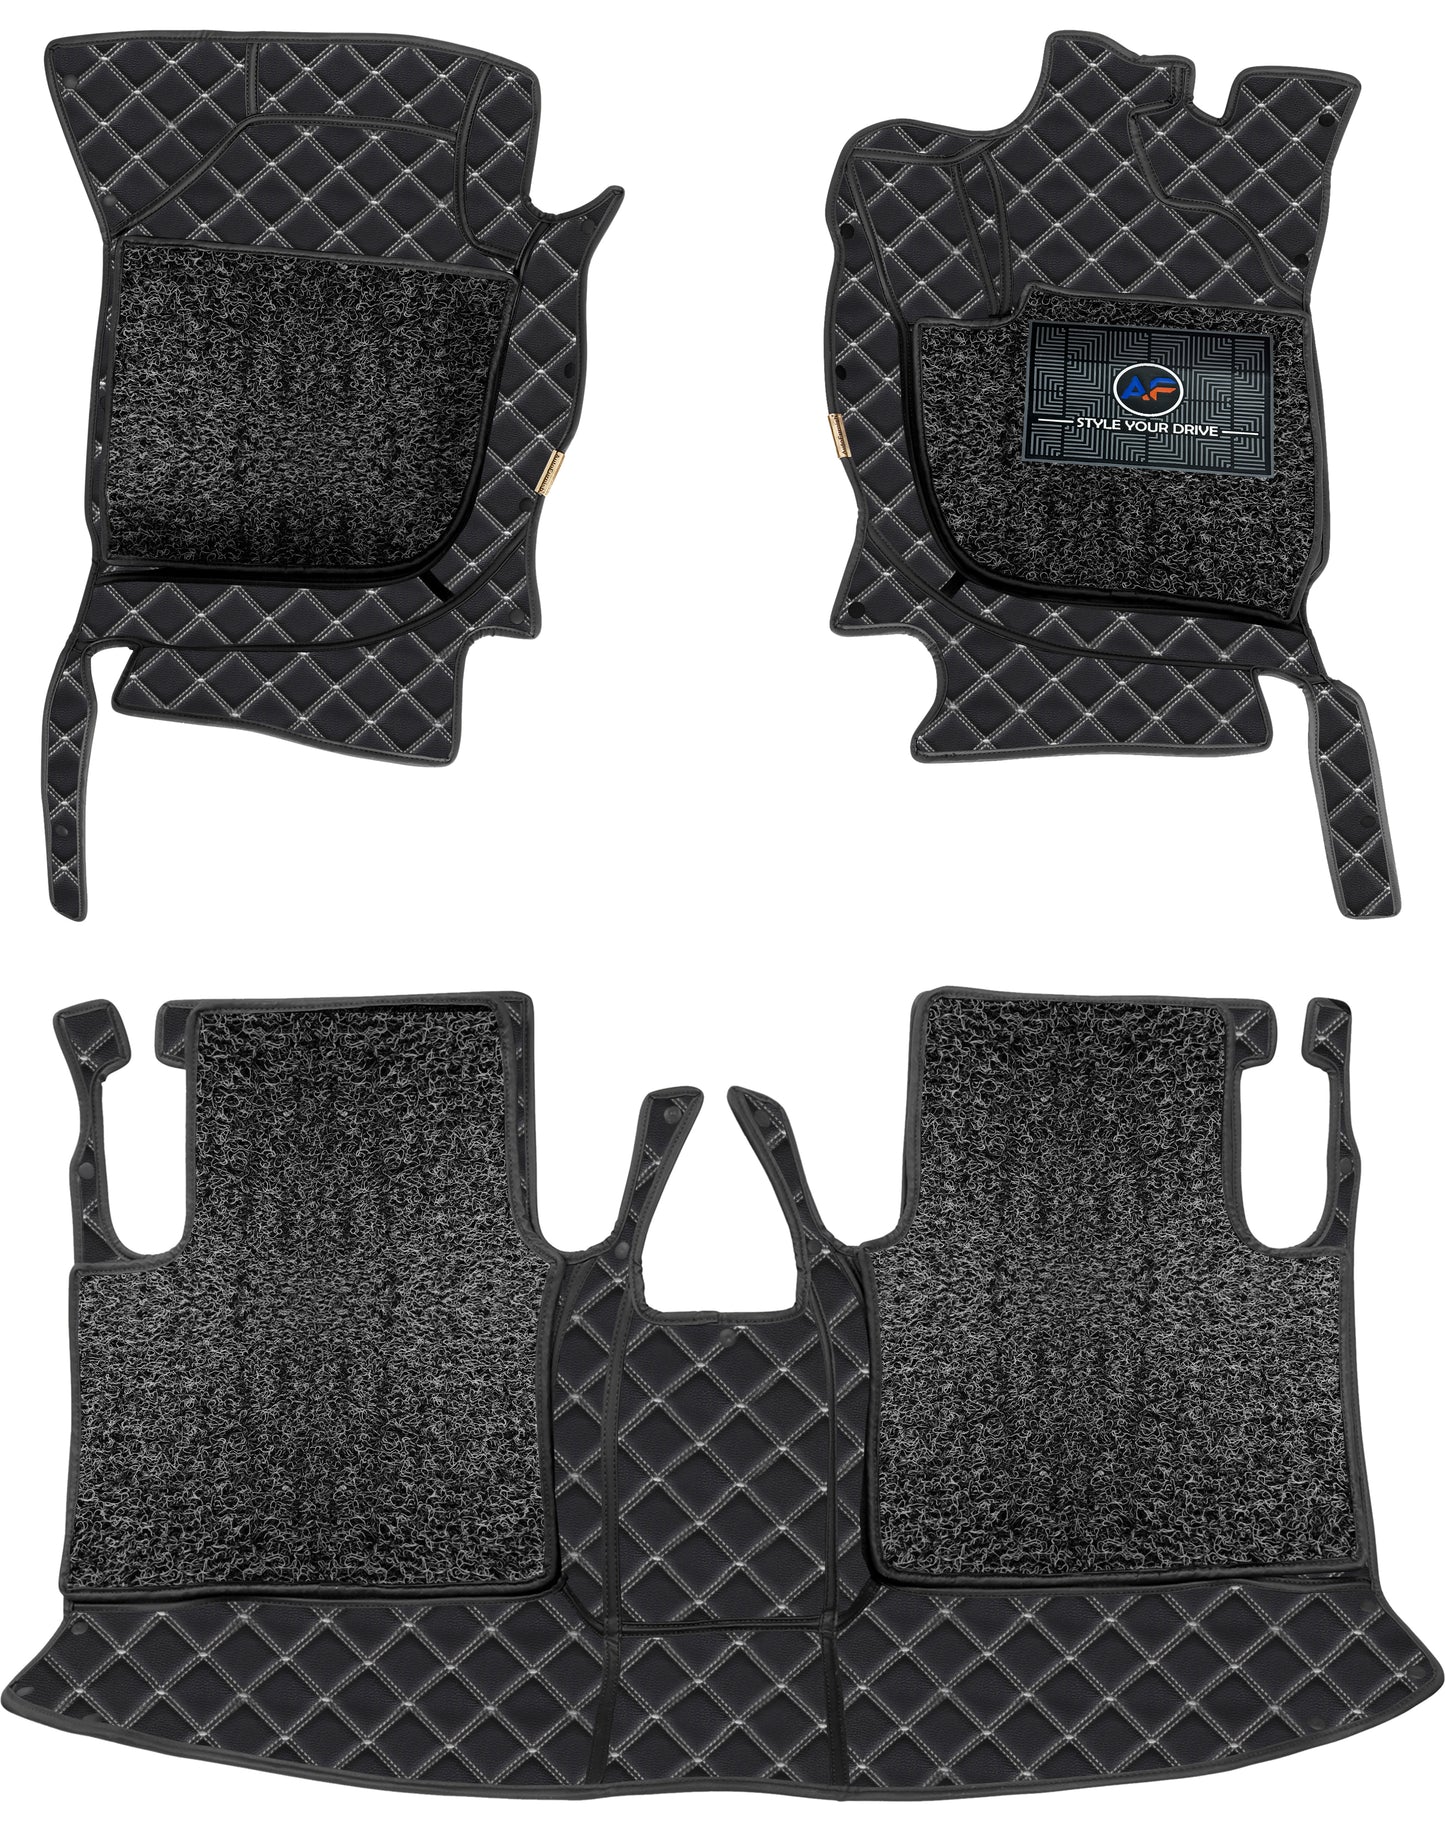 Mahindra TUV300 2015-18-7D Luxury Car Mat, All Weather Proof, Anti-Skid, 100% Waterproof & Odorless with Unique Diamond Fish Design (24mm Luxury PU Leather, 2 Rows)